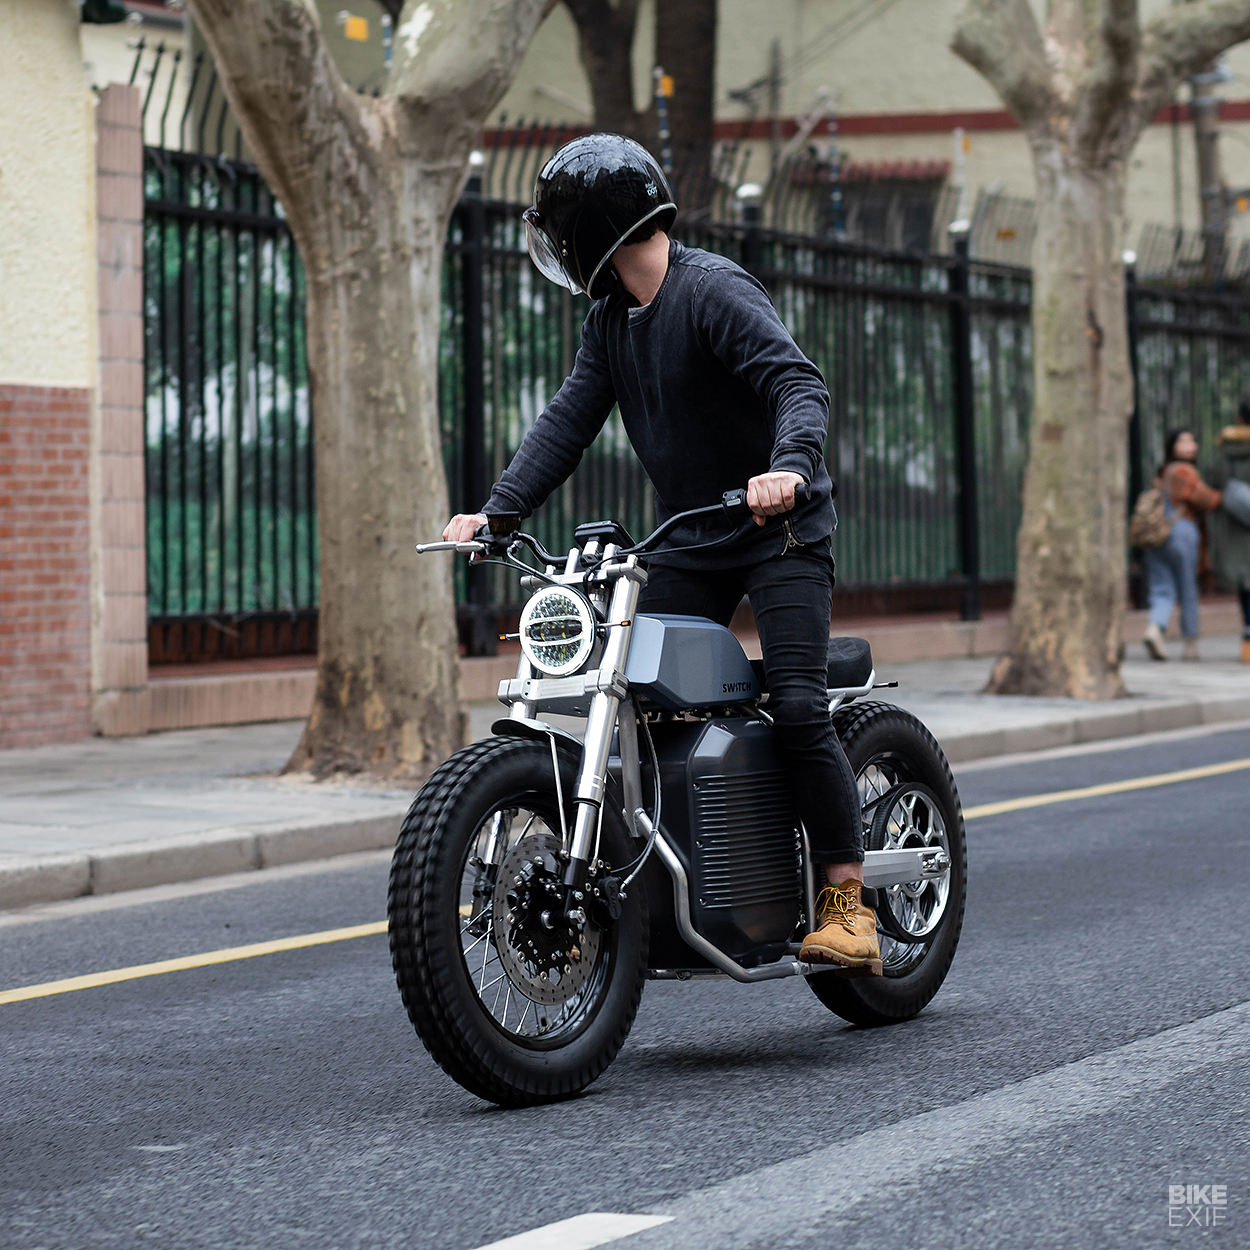 Switch eSCRAMBLER: the best-looking street legal electric motorcycle yet?